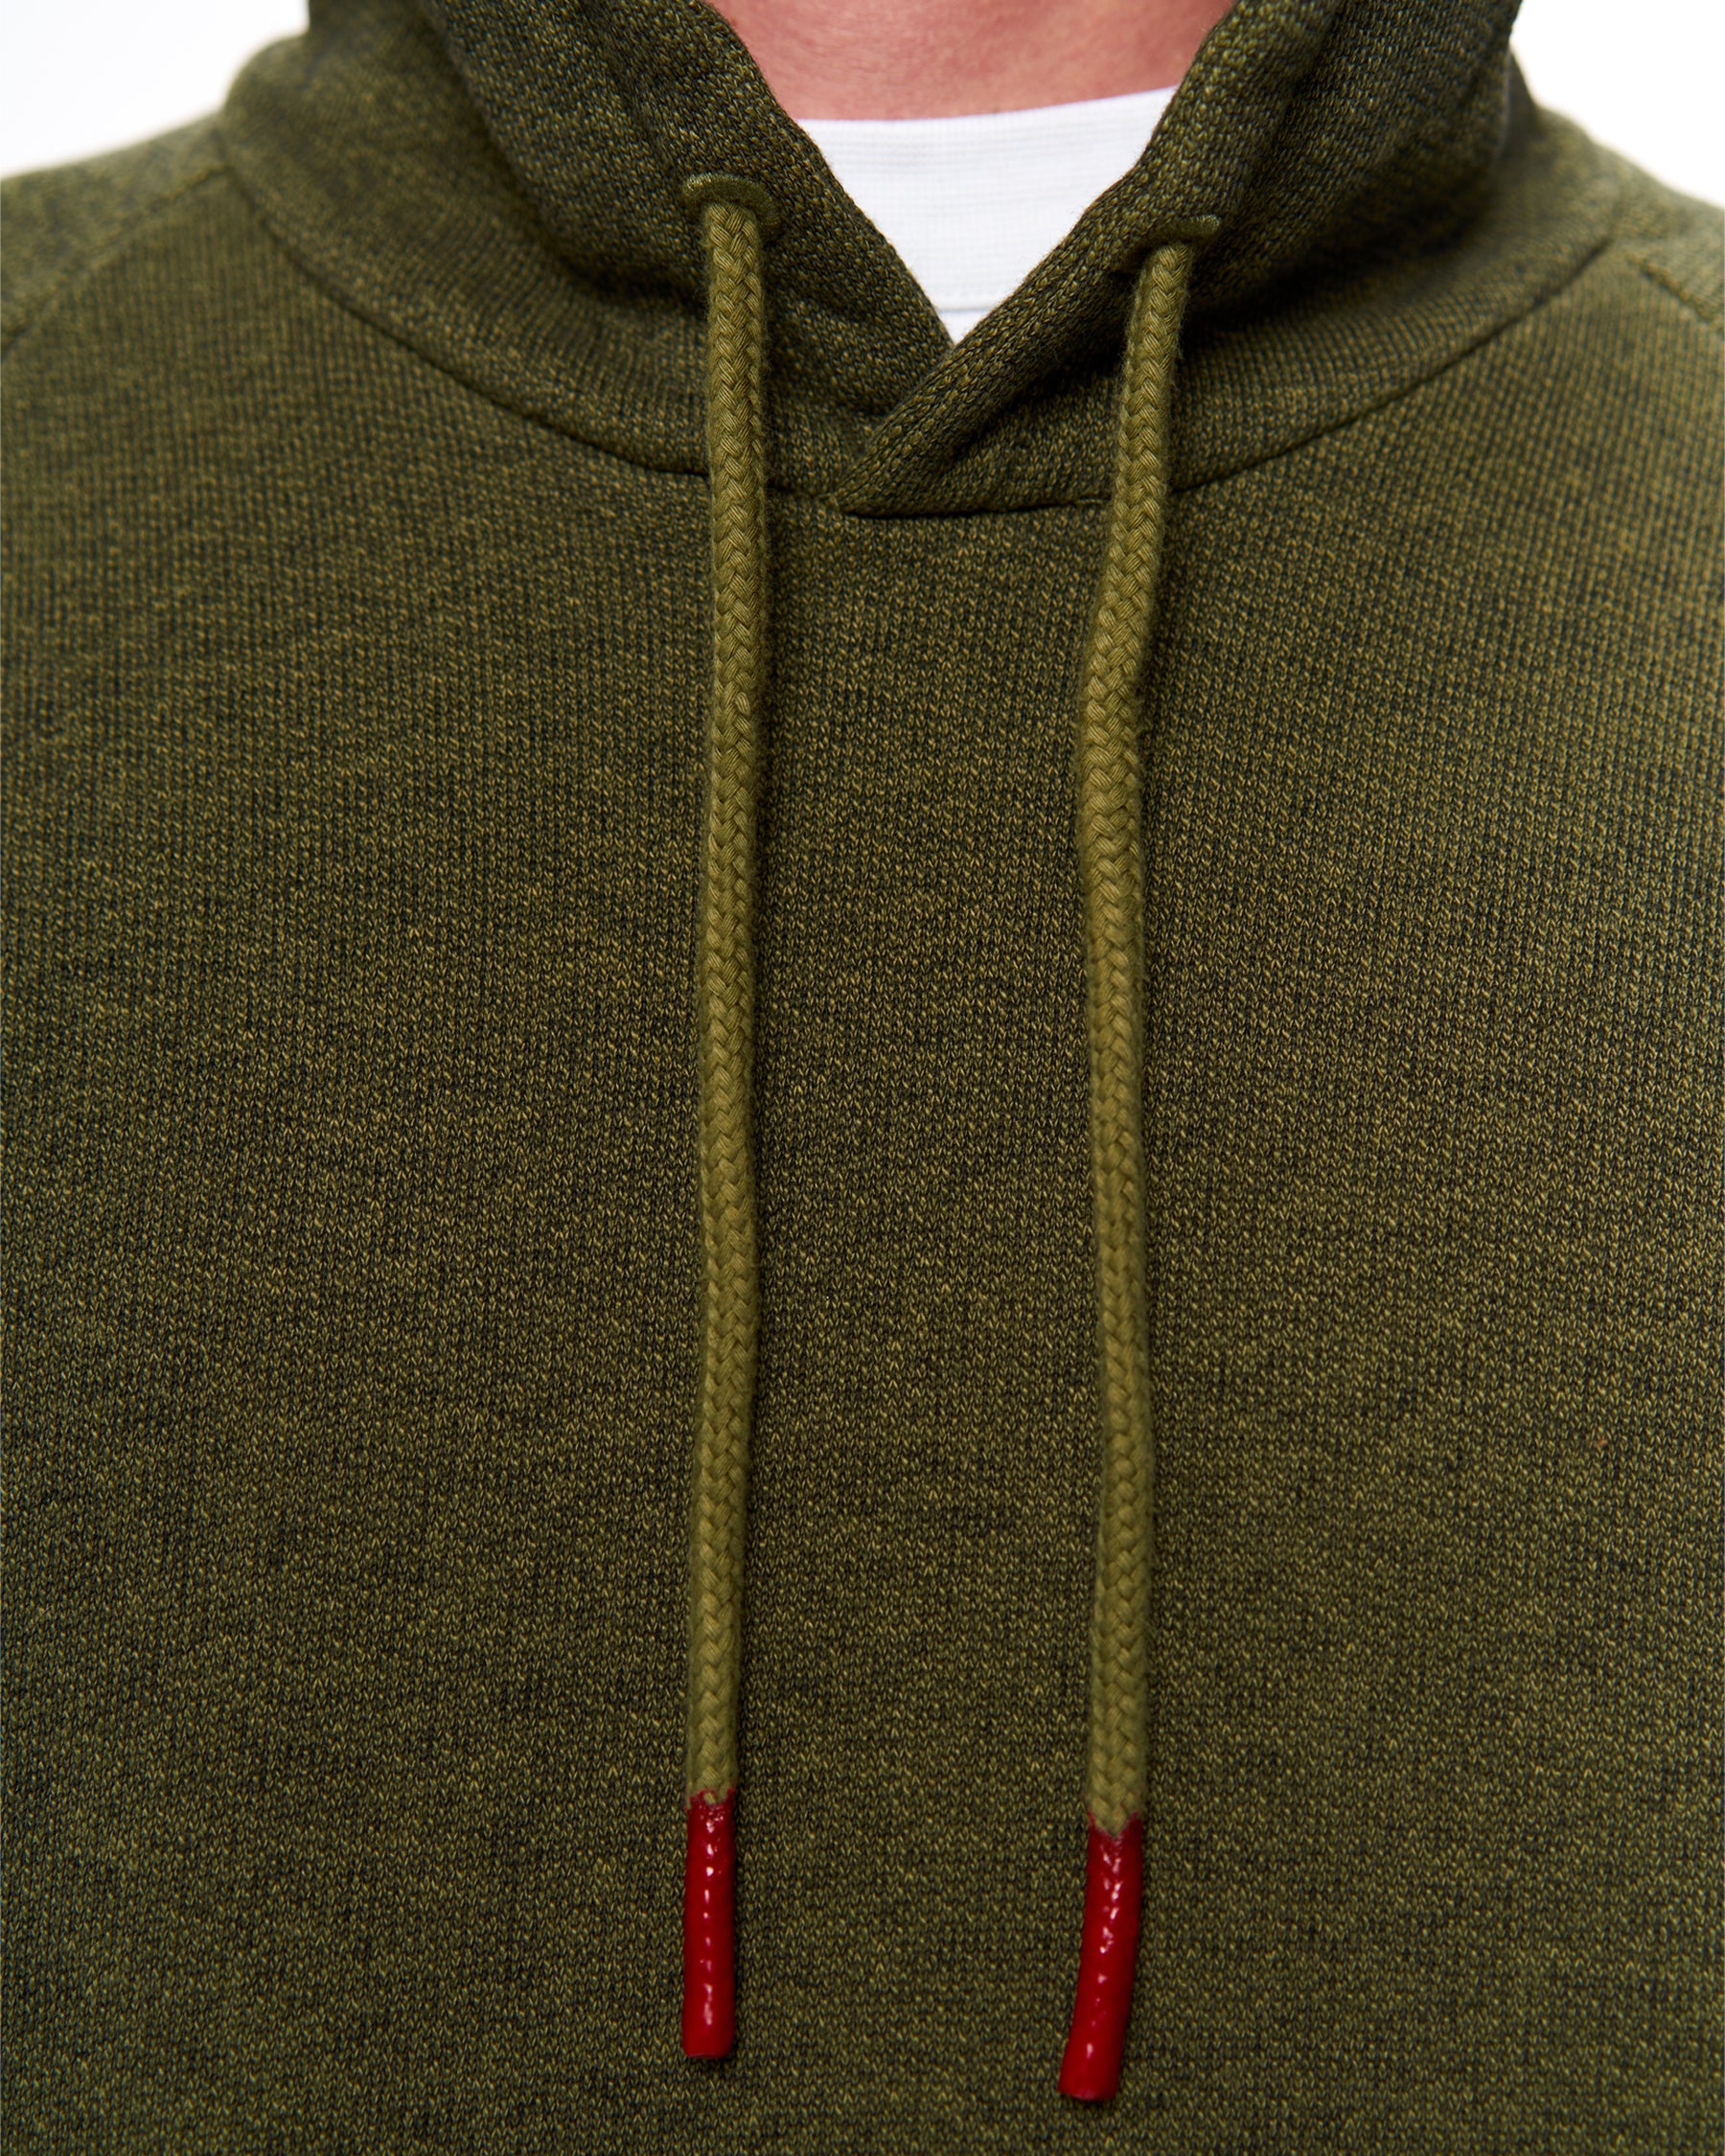 TERRY HOODIE ARMY GREEN